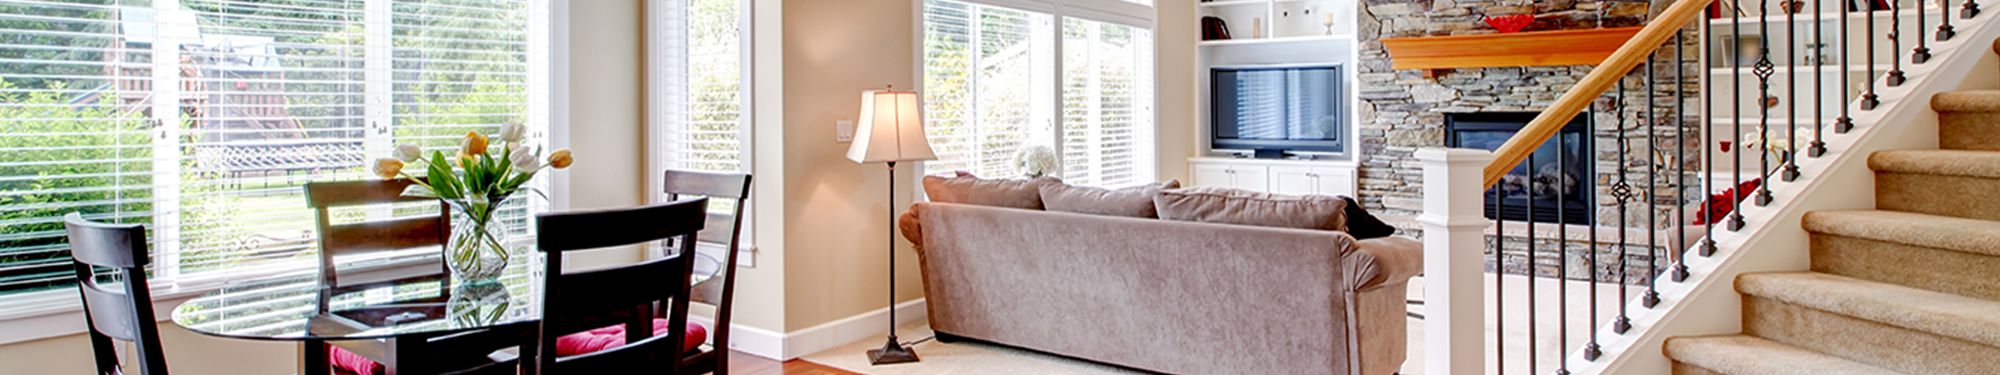 Window blinds in Dothan living space